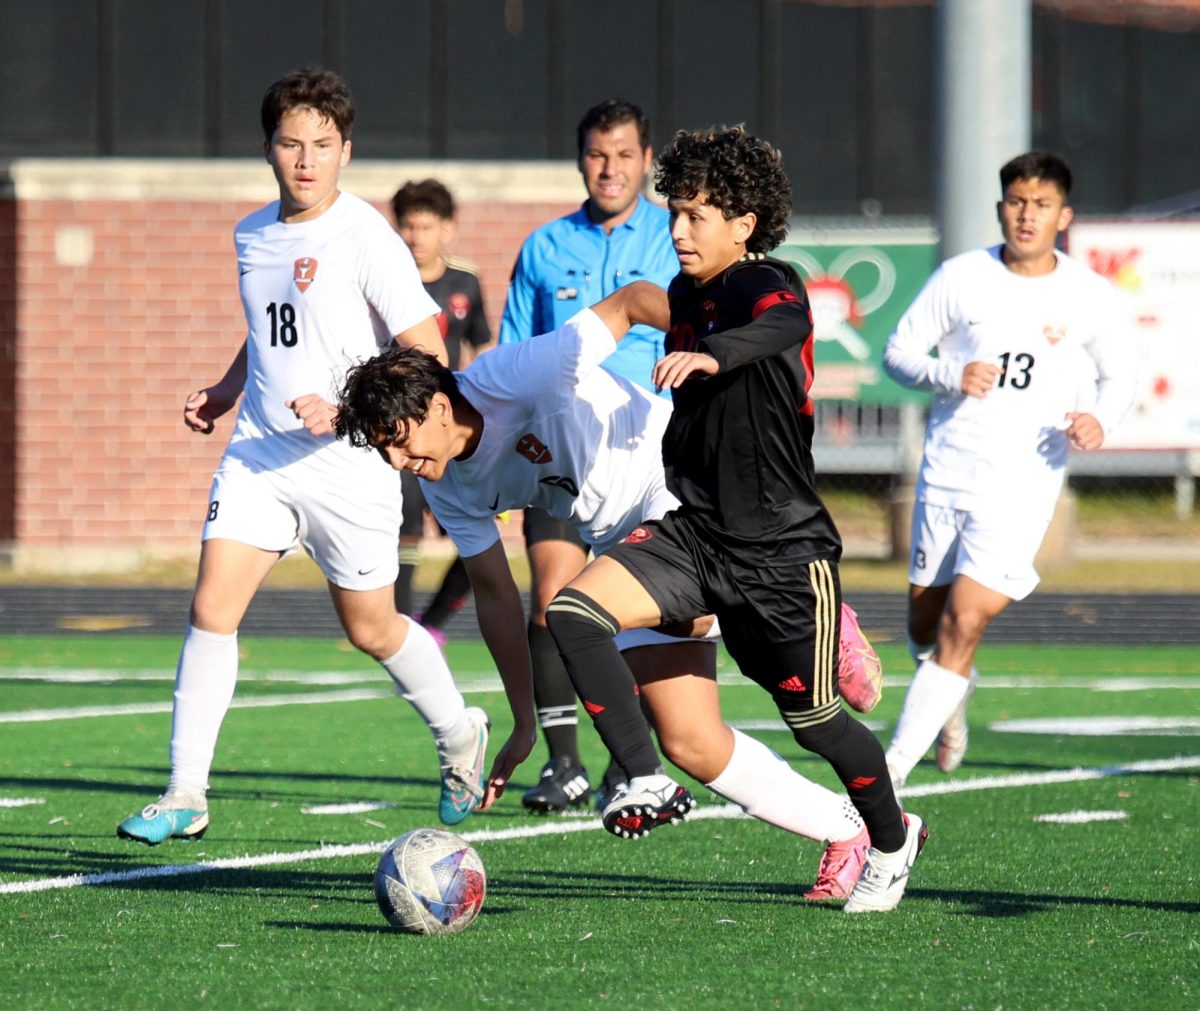 ON YOUR KNEES. Senior Alexis Cruz takes the ball from the opposing team during the Kilt Cup Tournament on Saturday, Jan. 6, 2024. The Varsity team ended the game with a loss of 2-1 against Dobie. “We shouldve won that game, Cruz said. We didnt finish our chances like we should have, but it’s progress and you have to trust it.”
